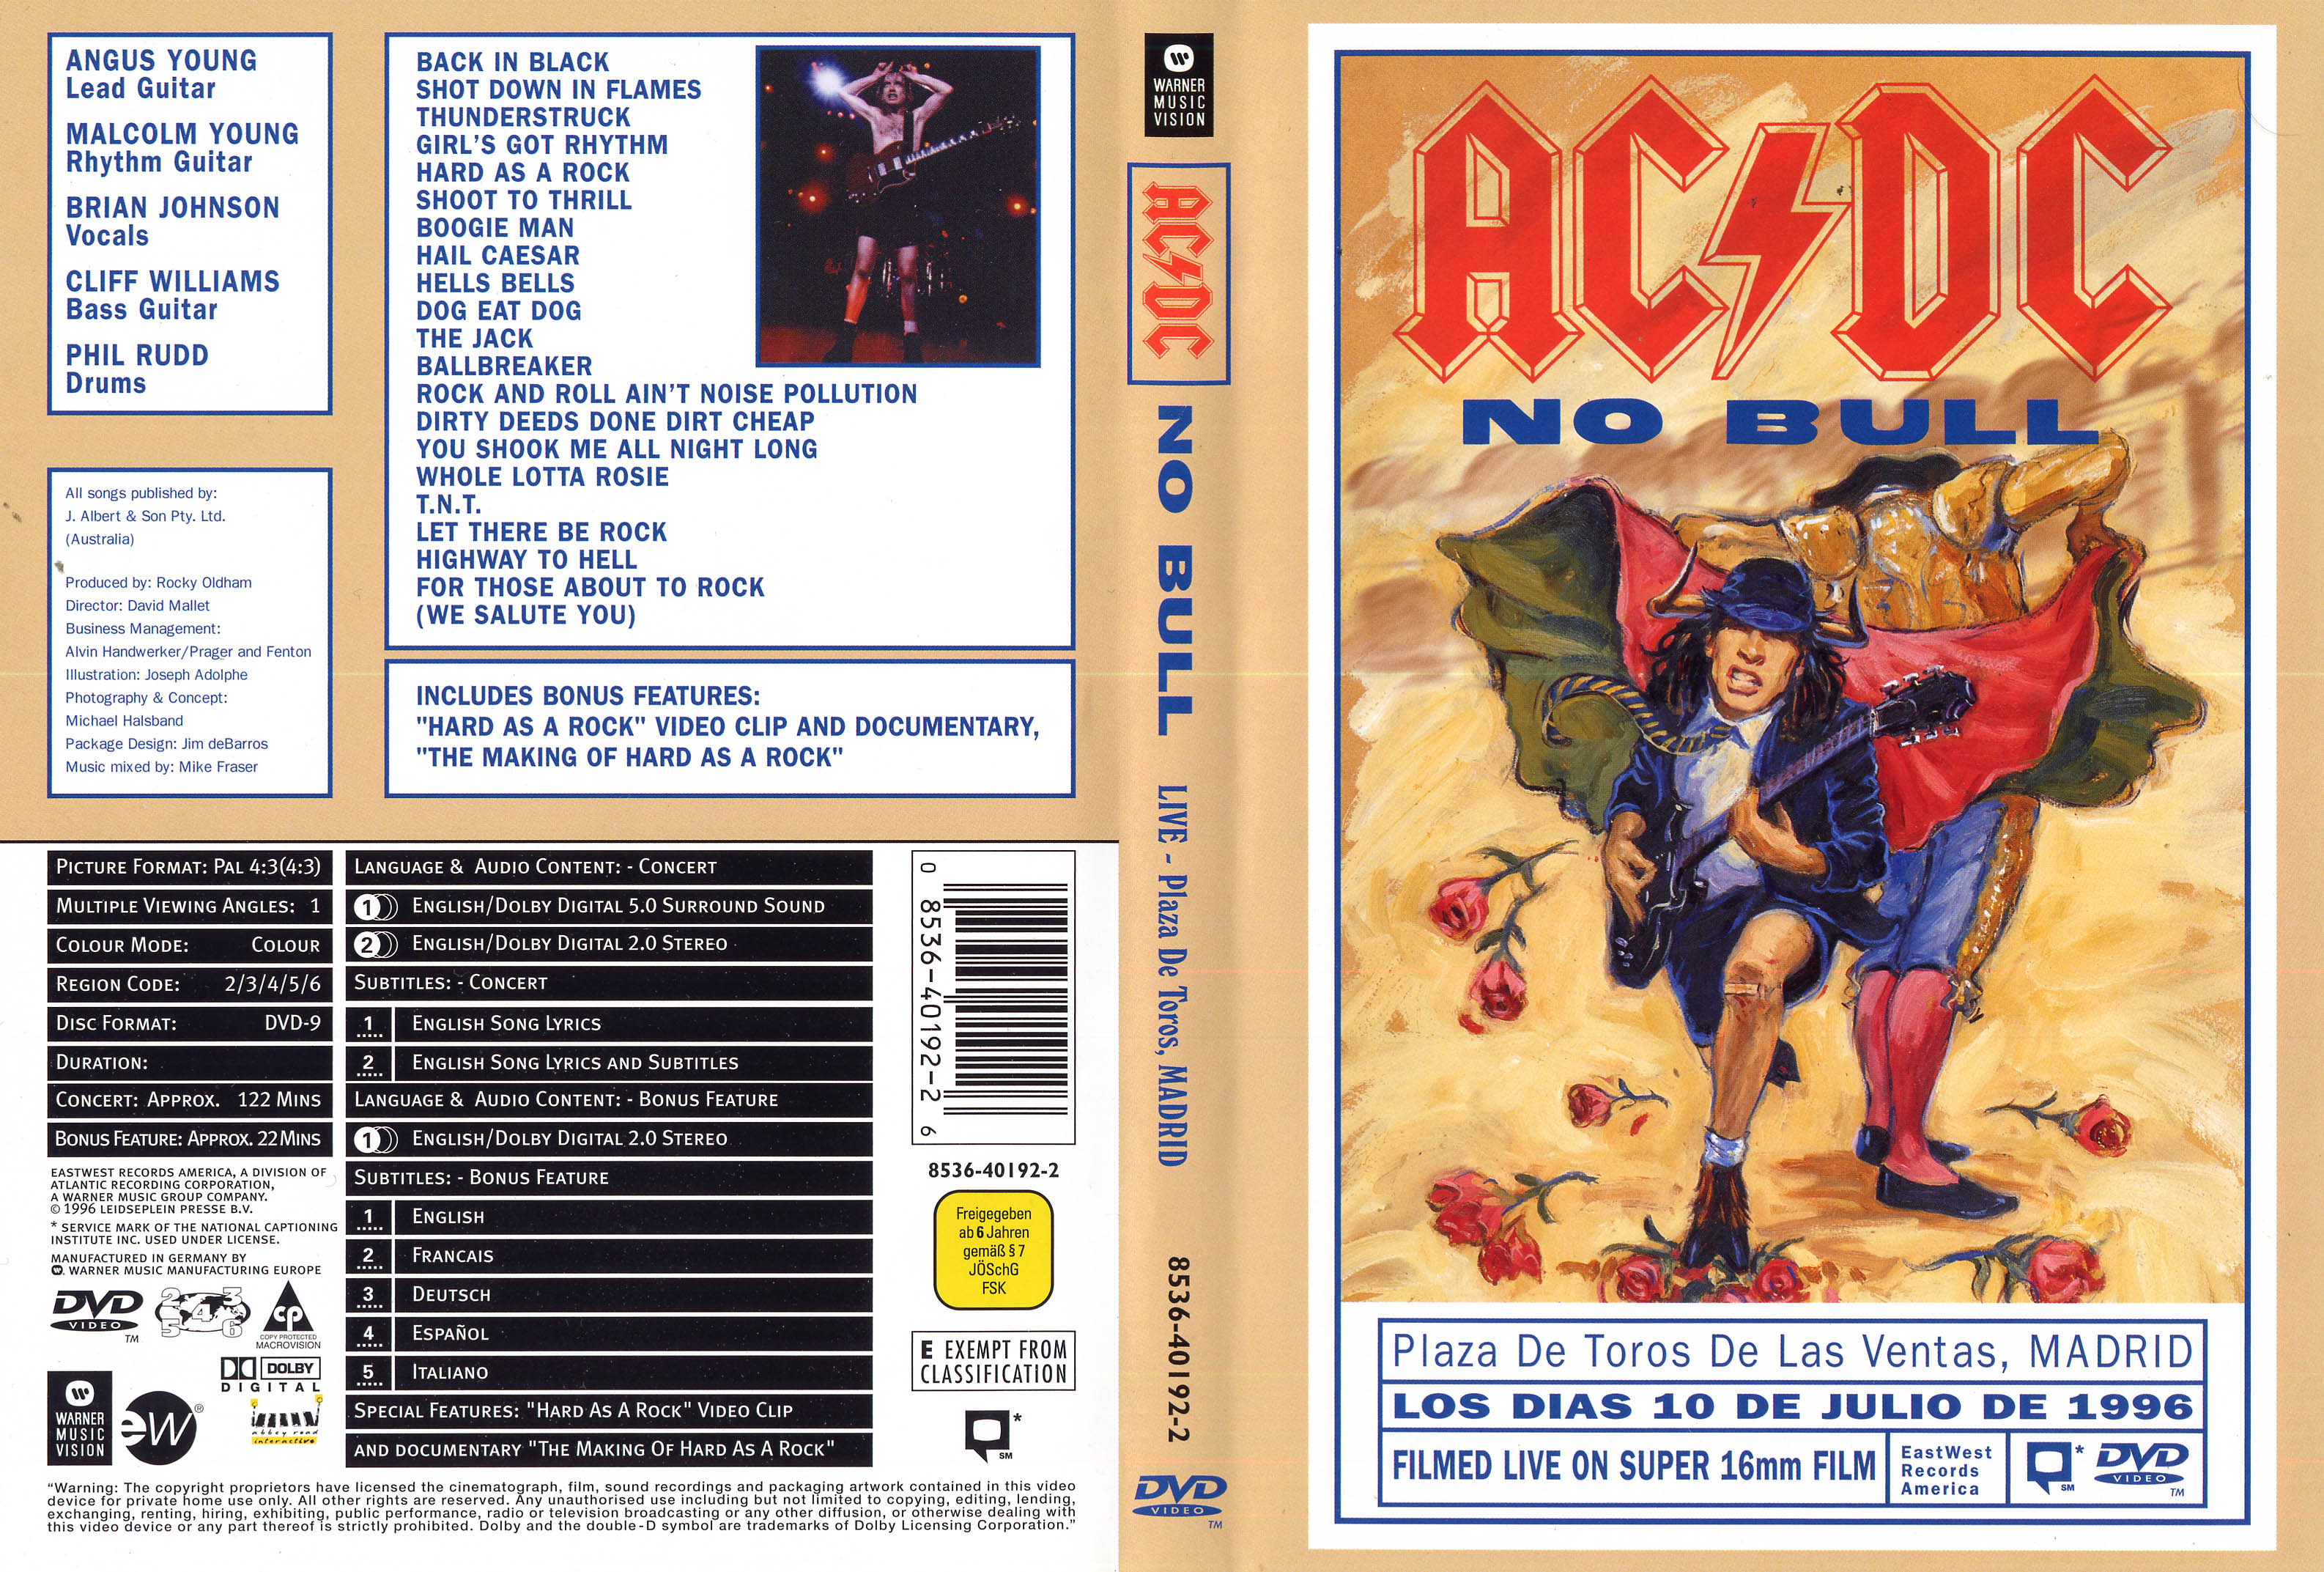 Jaquette DVD ACDC no bull